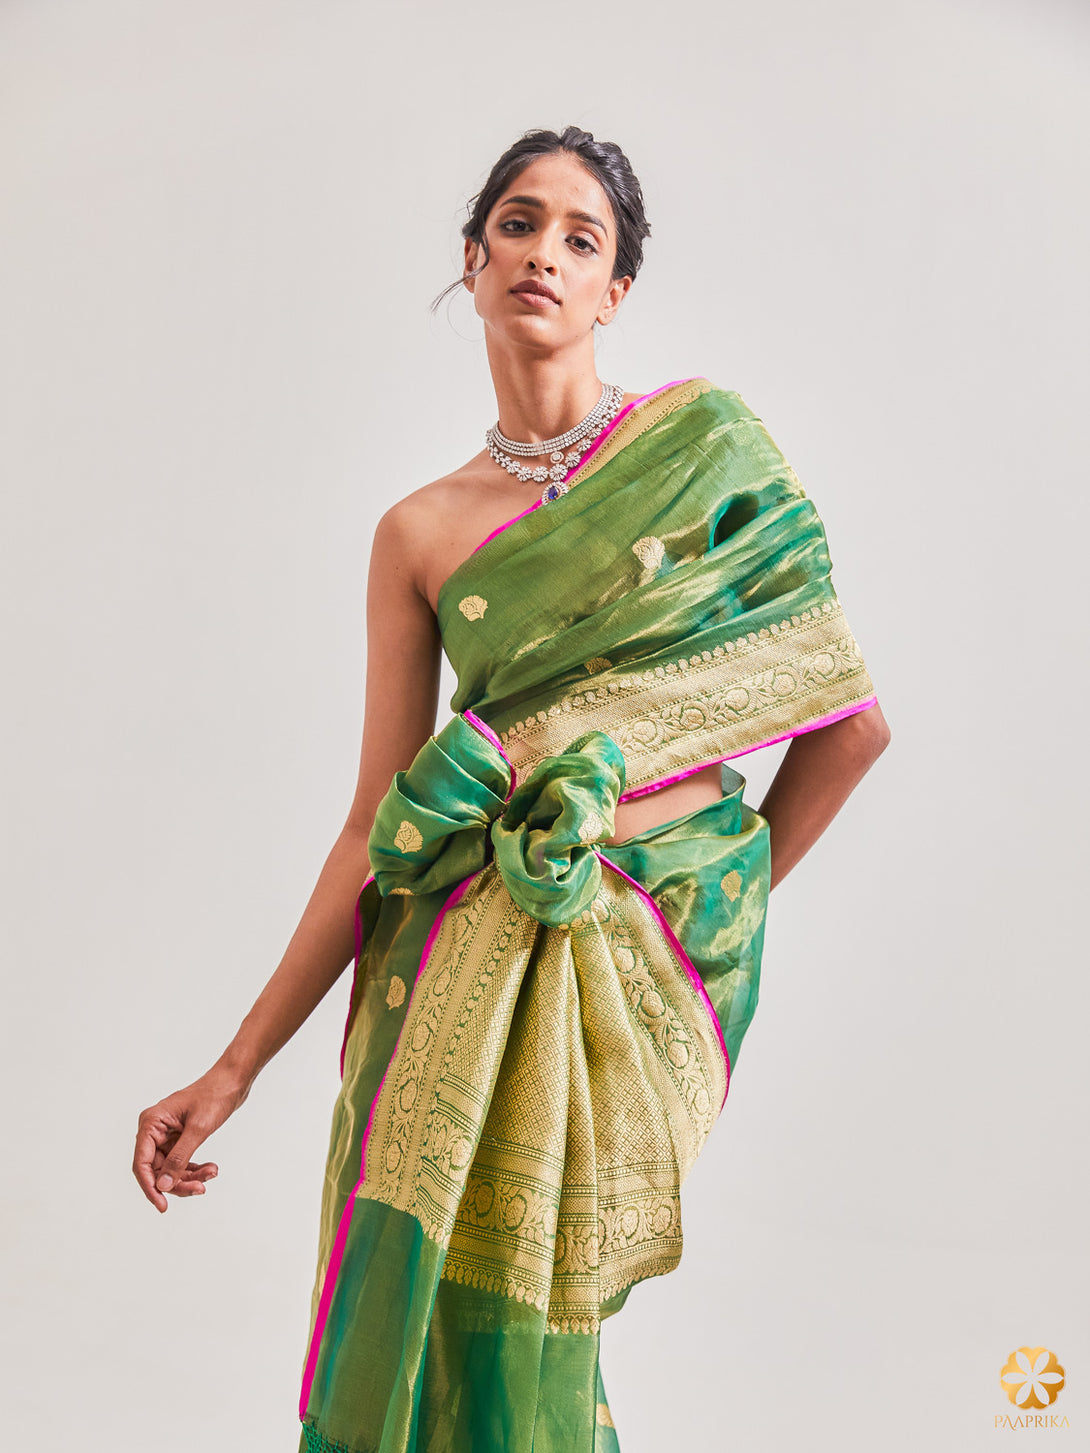 Exquisite Bottle Green and Gold Handwoven Tissue Saree with Contrast Popping Pink Selvedge - Sophistication and Charm Combined.